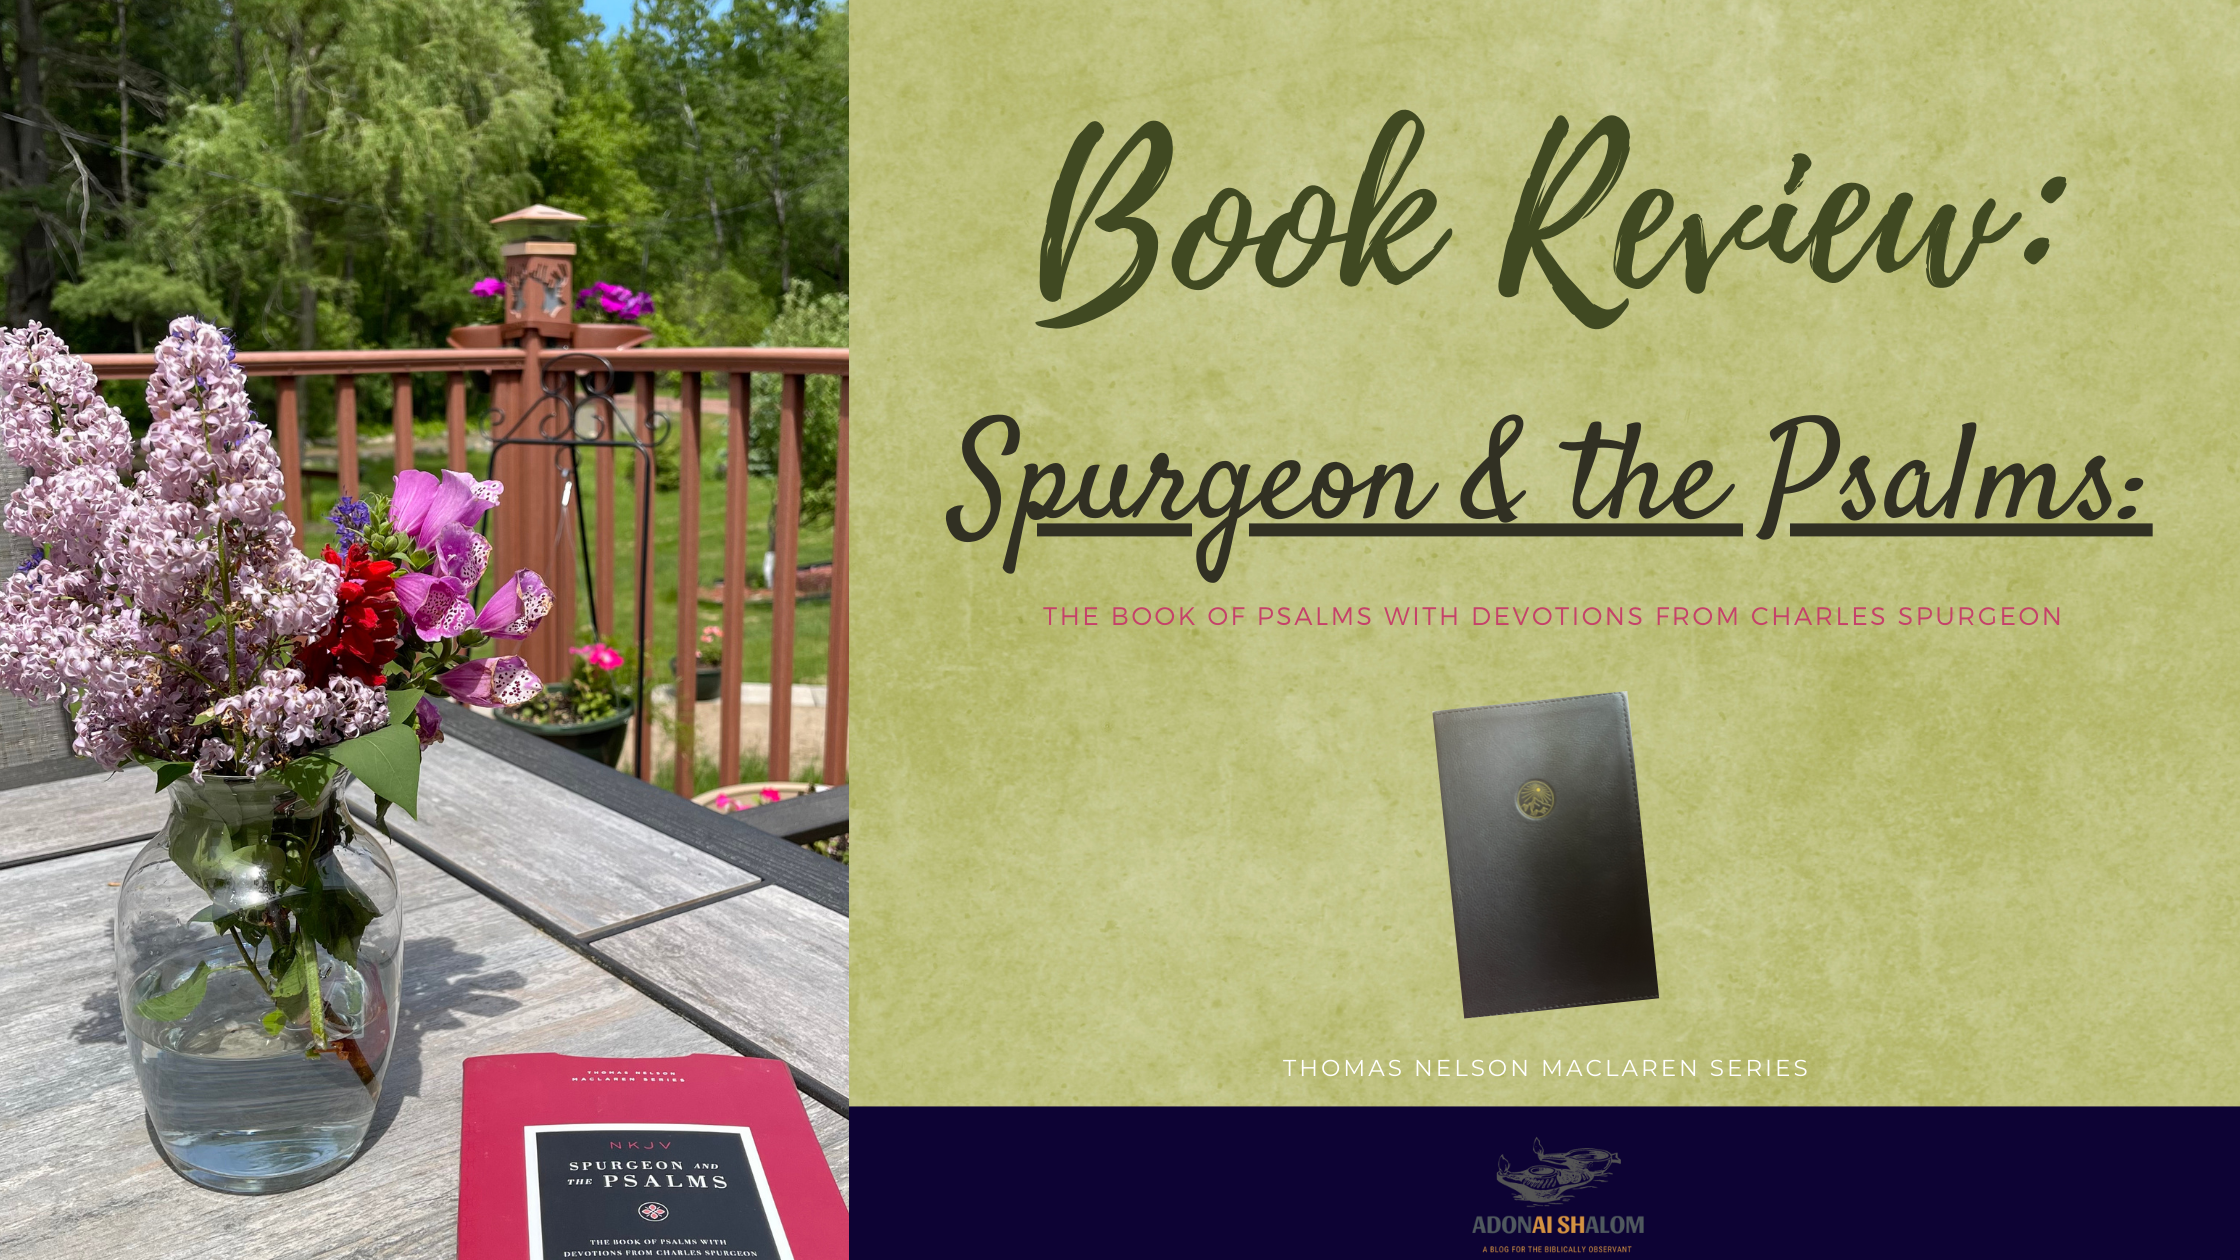 Spurgeon and the Psalms book review